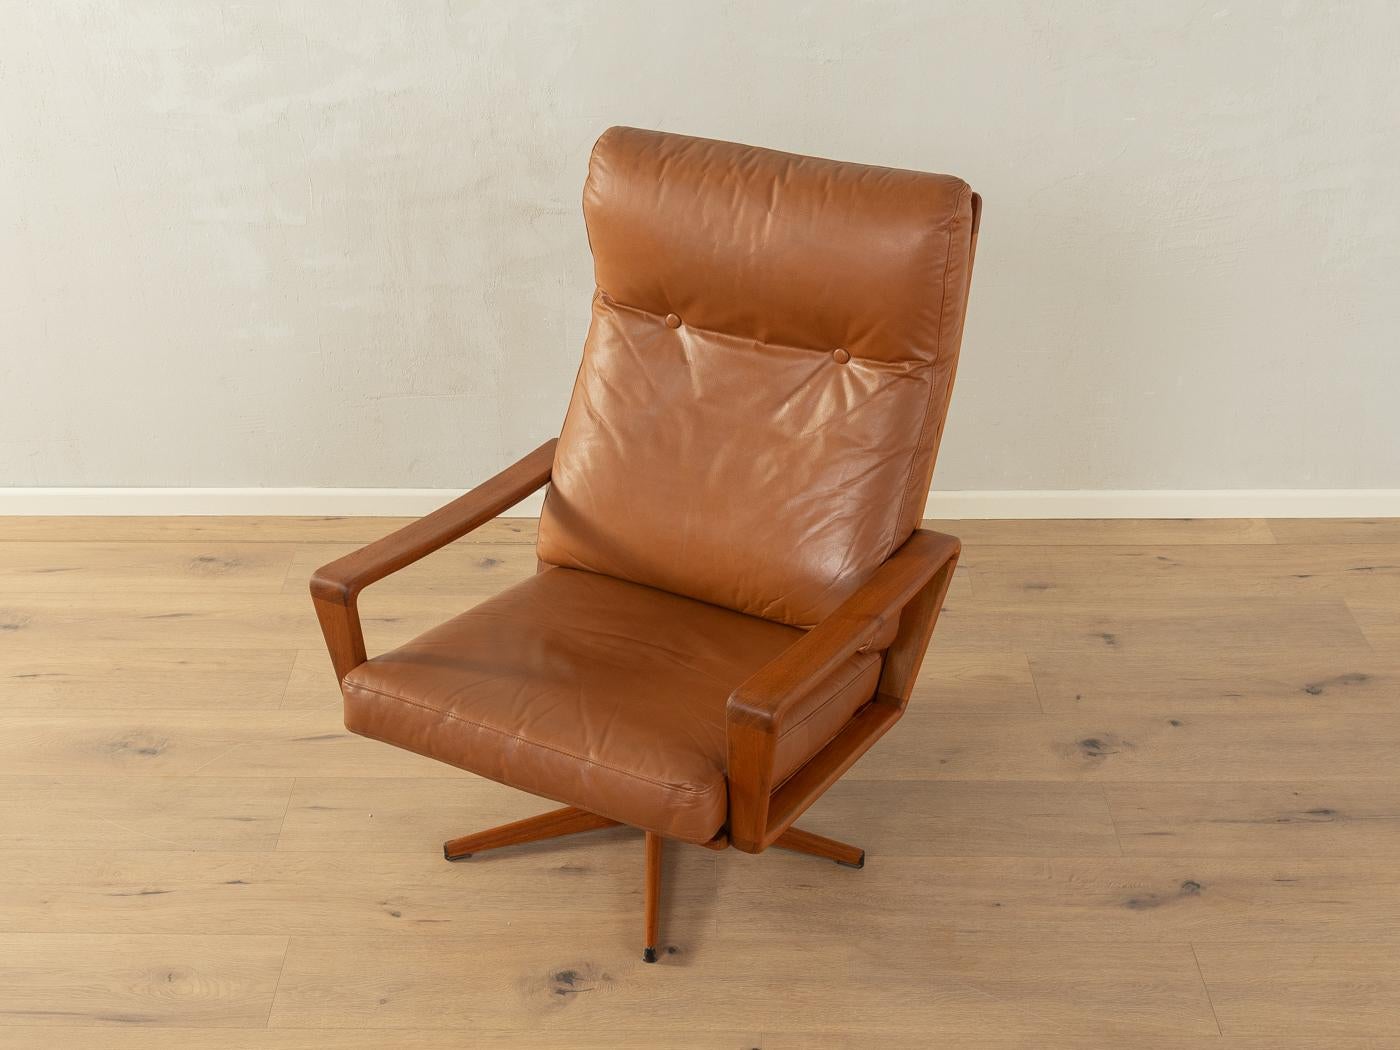 Swivel lounge chair by Arne Wahl Iversen for Komfort from the 1960s. Teak frame with new the original high-quality dark brown leather cover.

Quality Features:
    accomplished design: perfect proportions and visible attention to detail
   